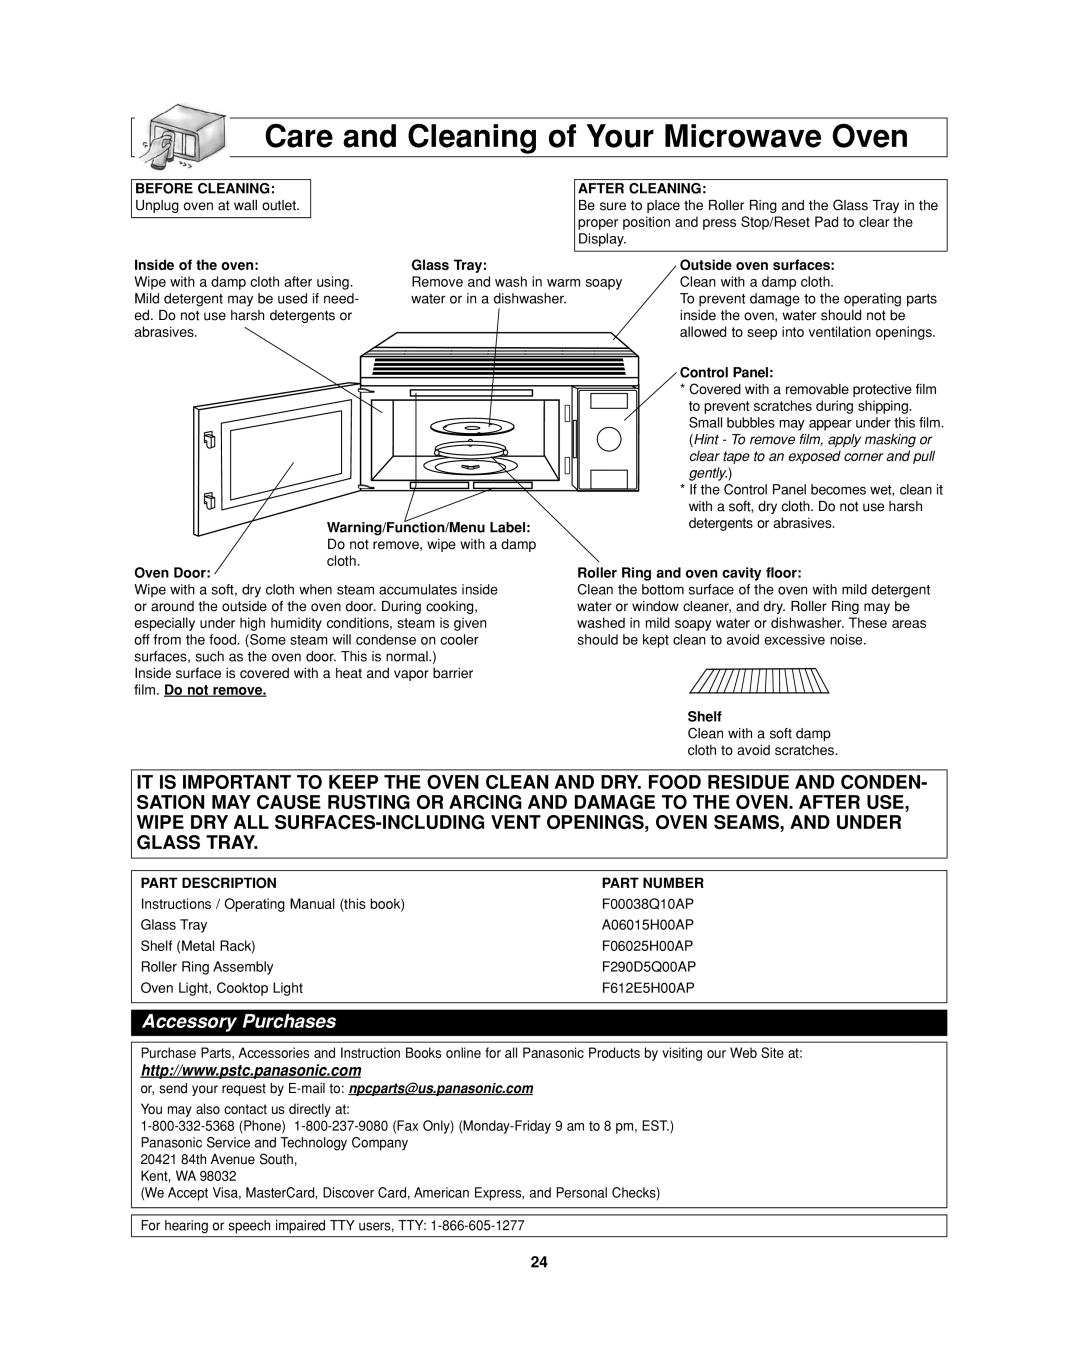 Panasonic NN-SD277 Care and Cleaning of Your Microwave Oven, Accessory Purchases, After Cleaning, Inside of the oven 